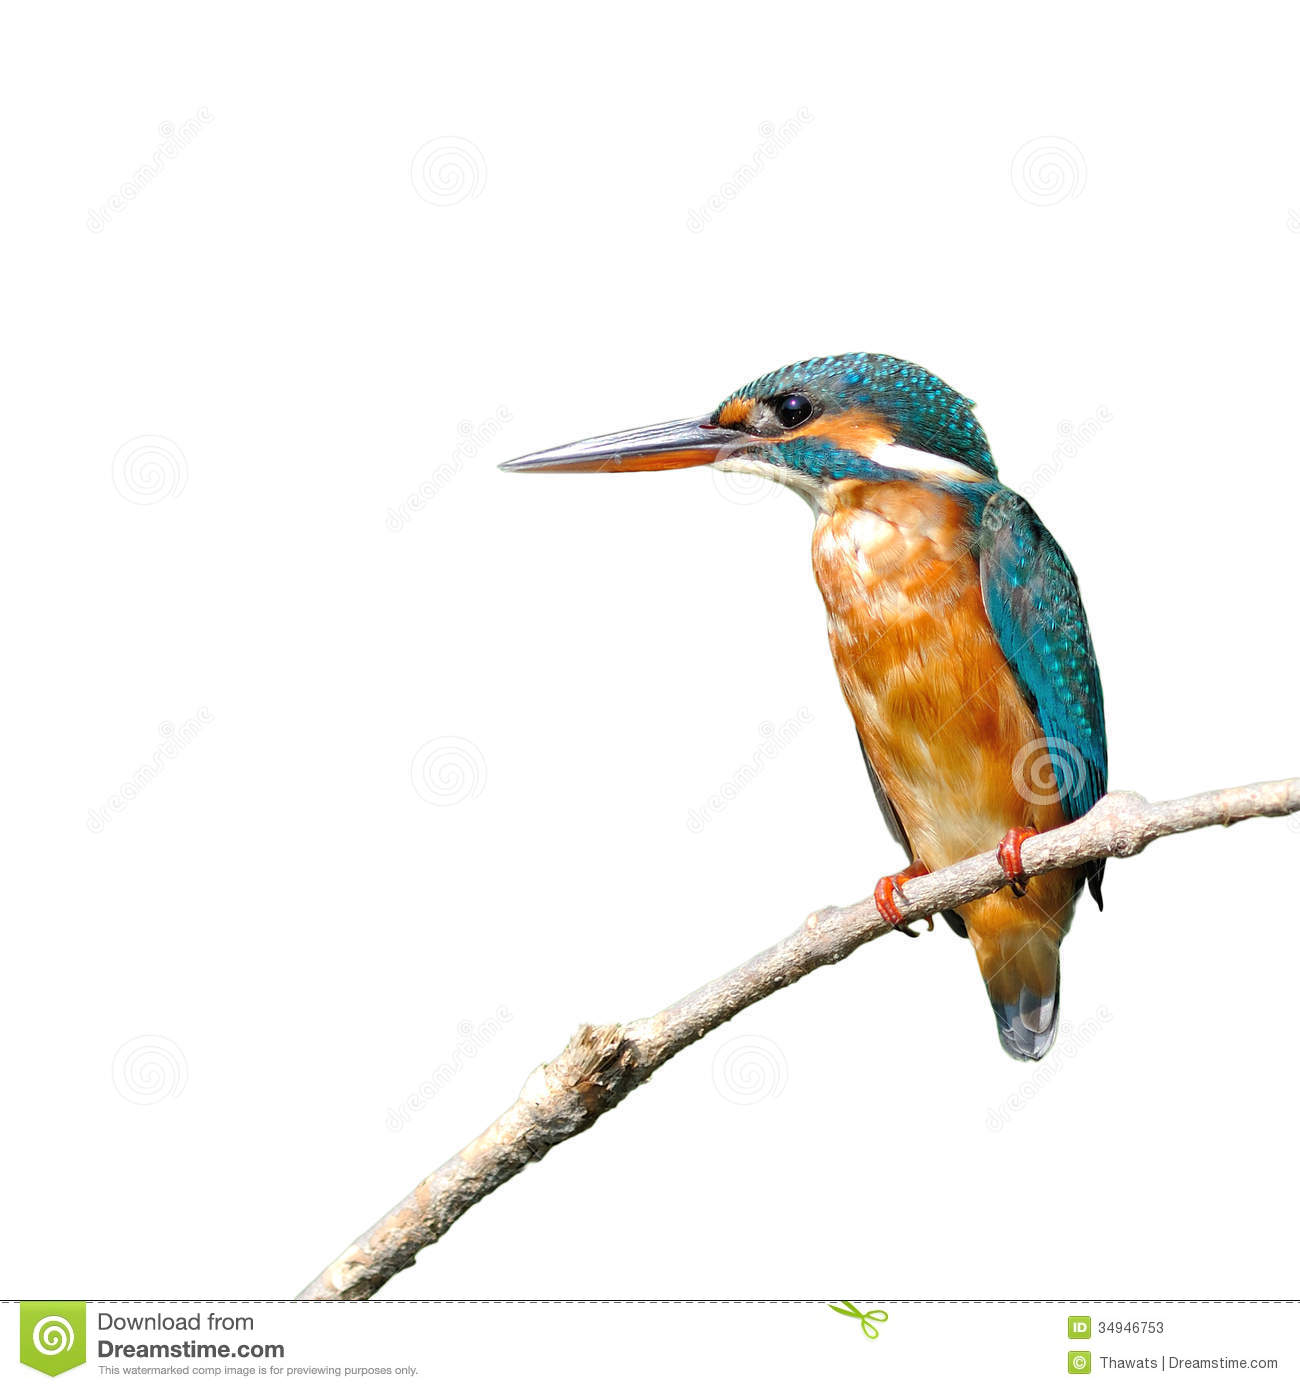 Common Kingfisher clipart #17, Download drawings